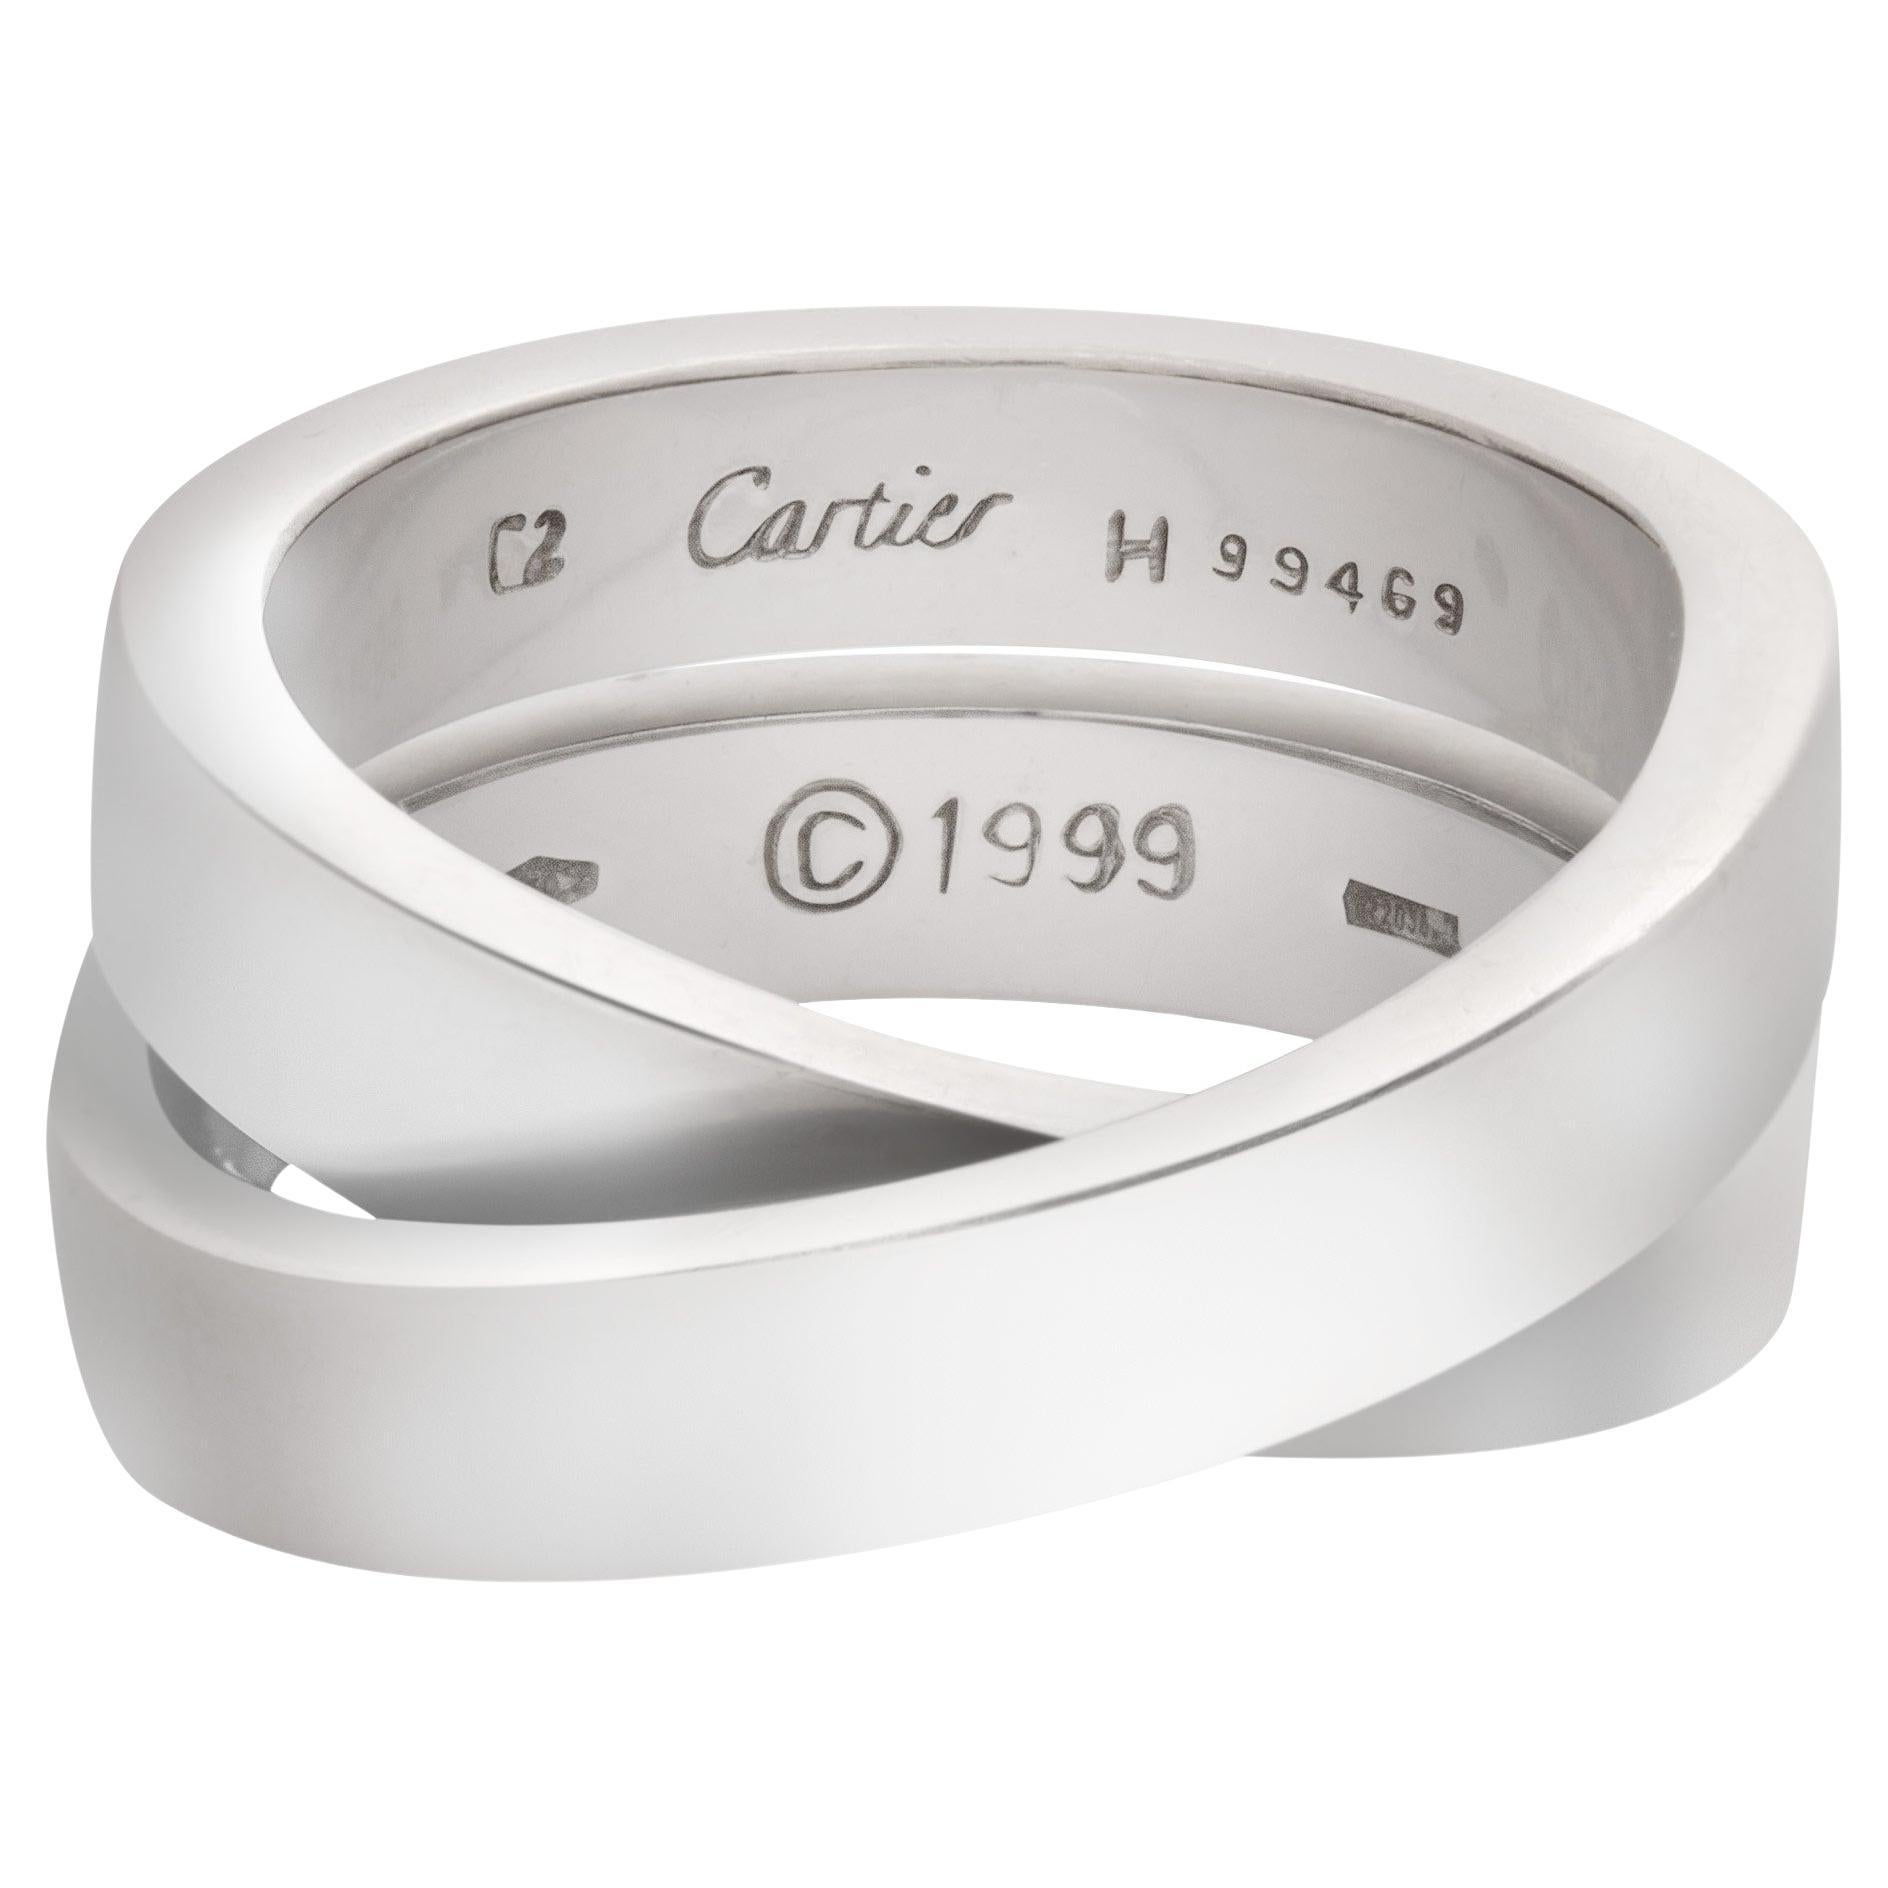 Cartier Crossover ring in 18k white gold For Sale